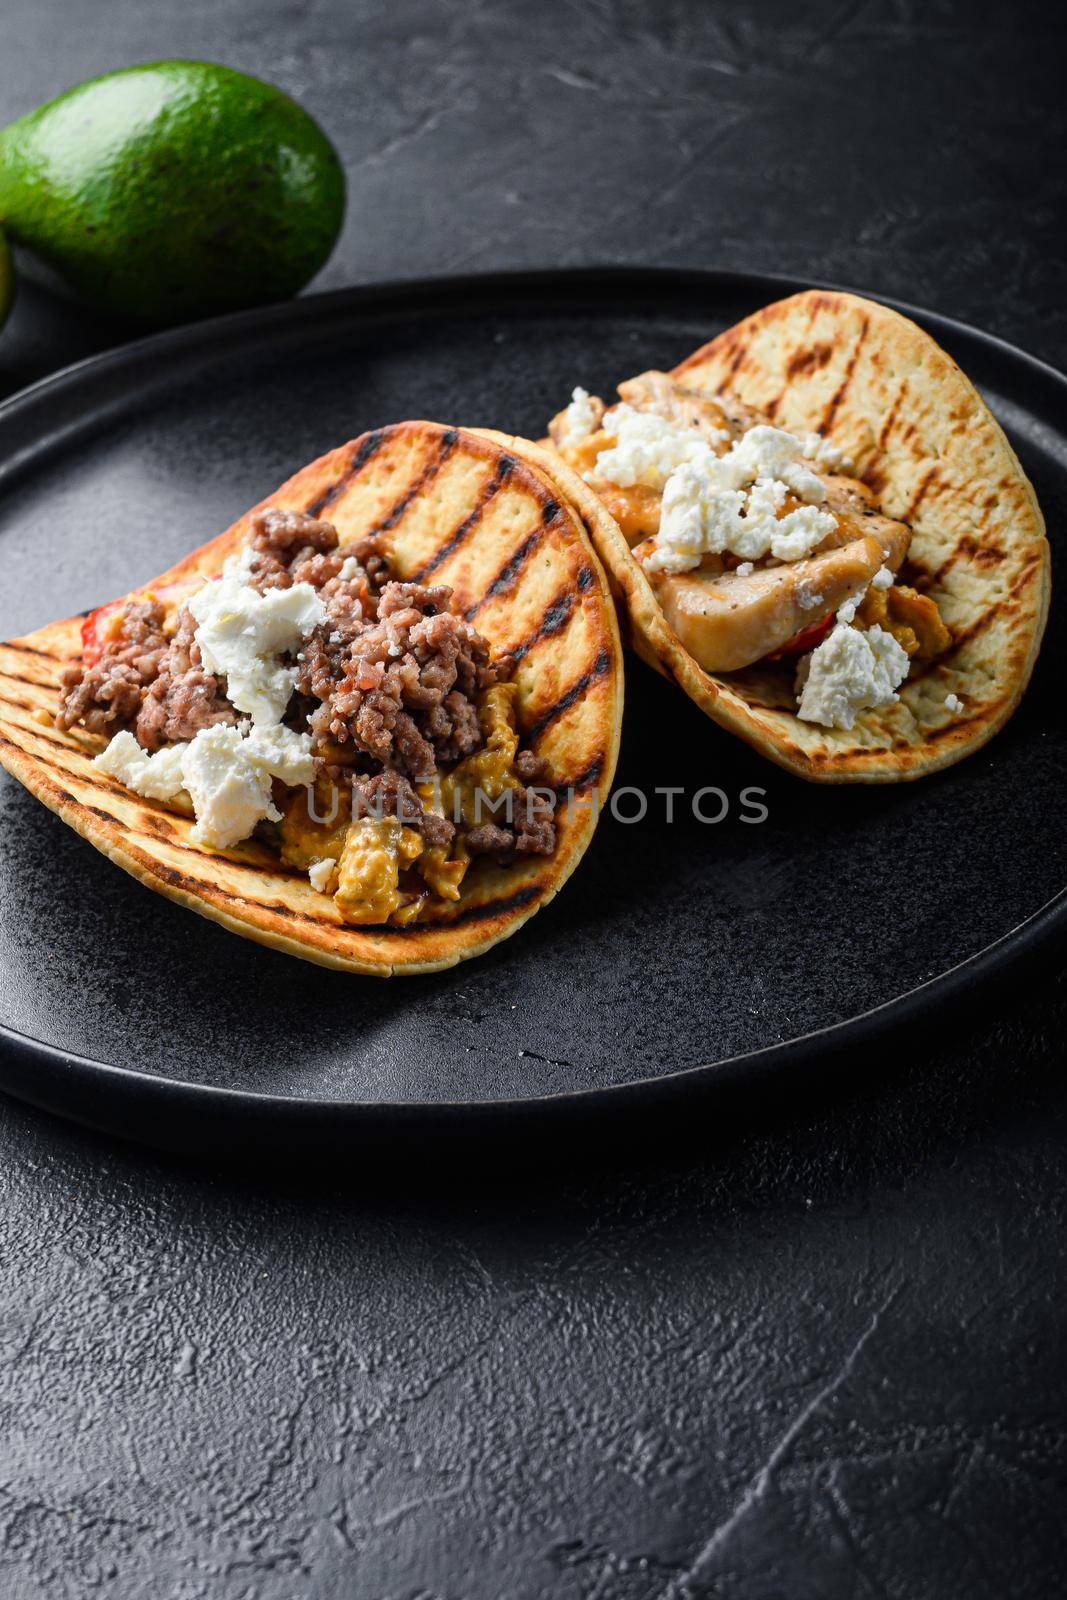 Mexican tacos with vegetables and beeaf and chicken meat on black round plate over textured black background, side view, selective focus vertical.